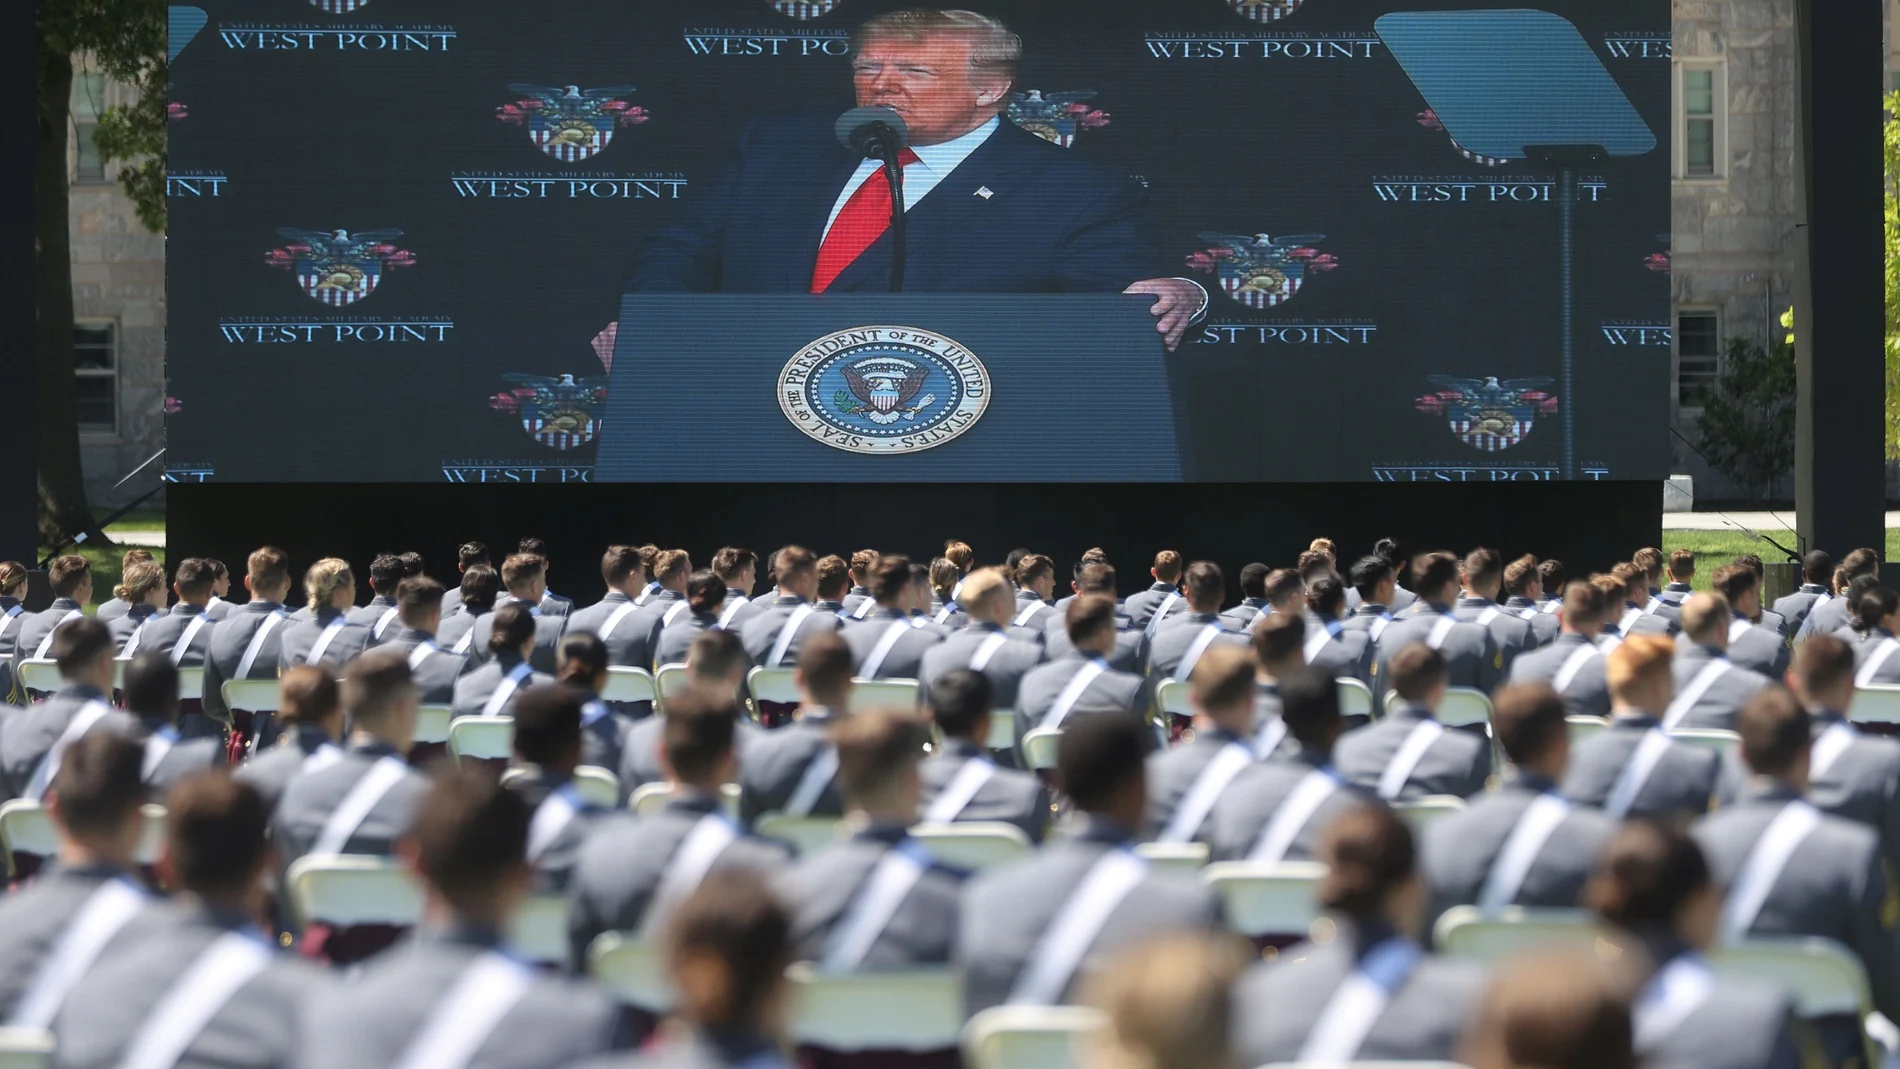 U.S. President Trump is displayed on a screen as he delivers remarks to West Point graduating cadets during their 2020 United States Military Academy graduation ceremony at West Point, New York